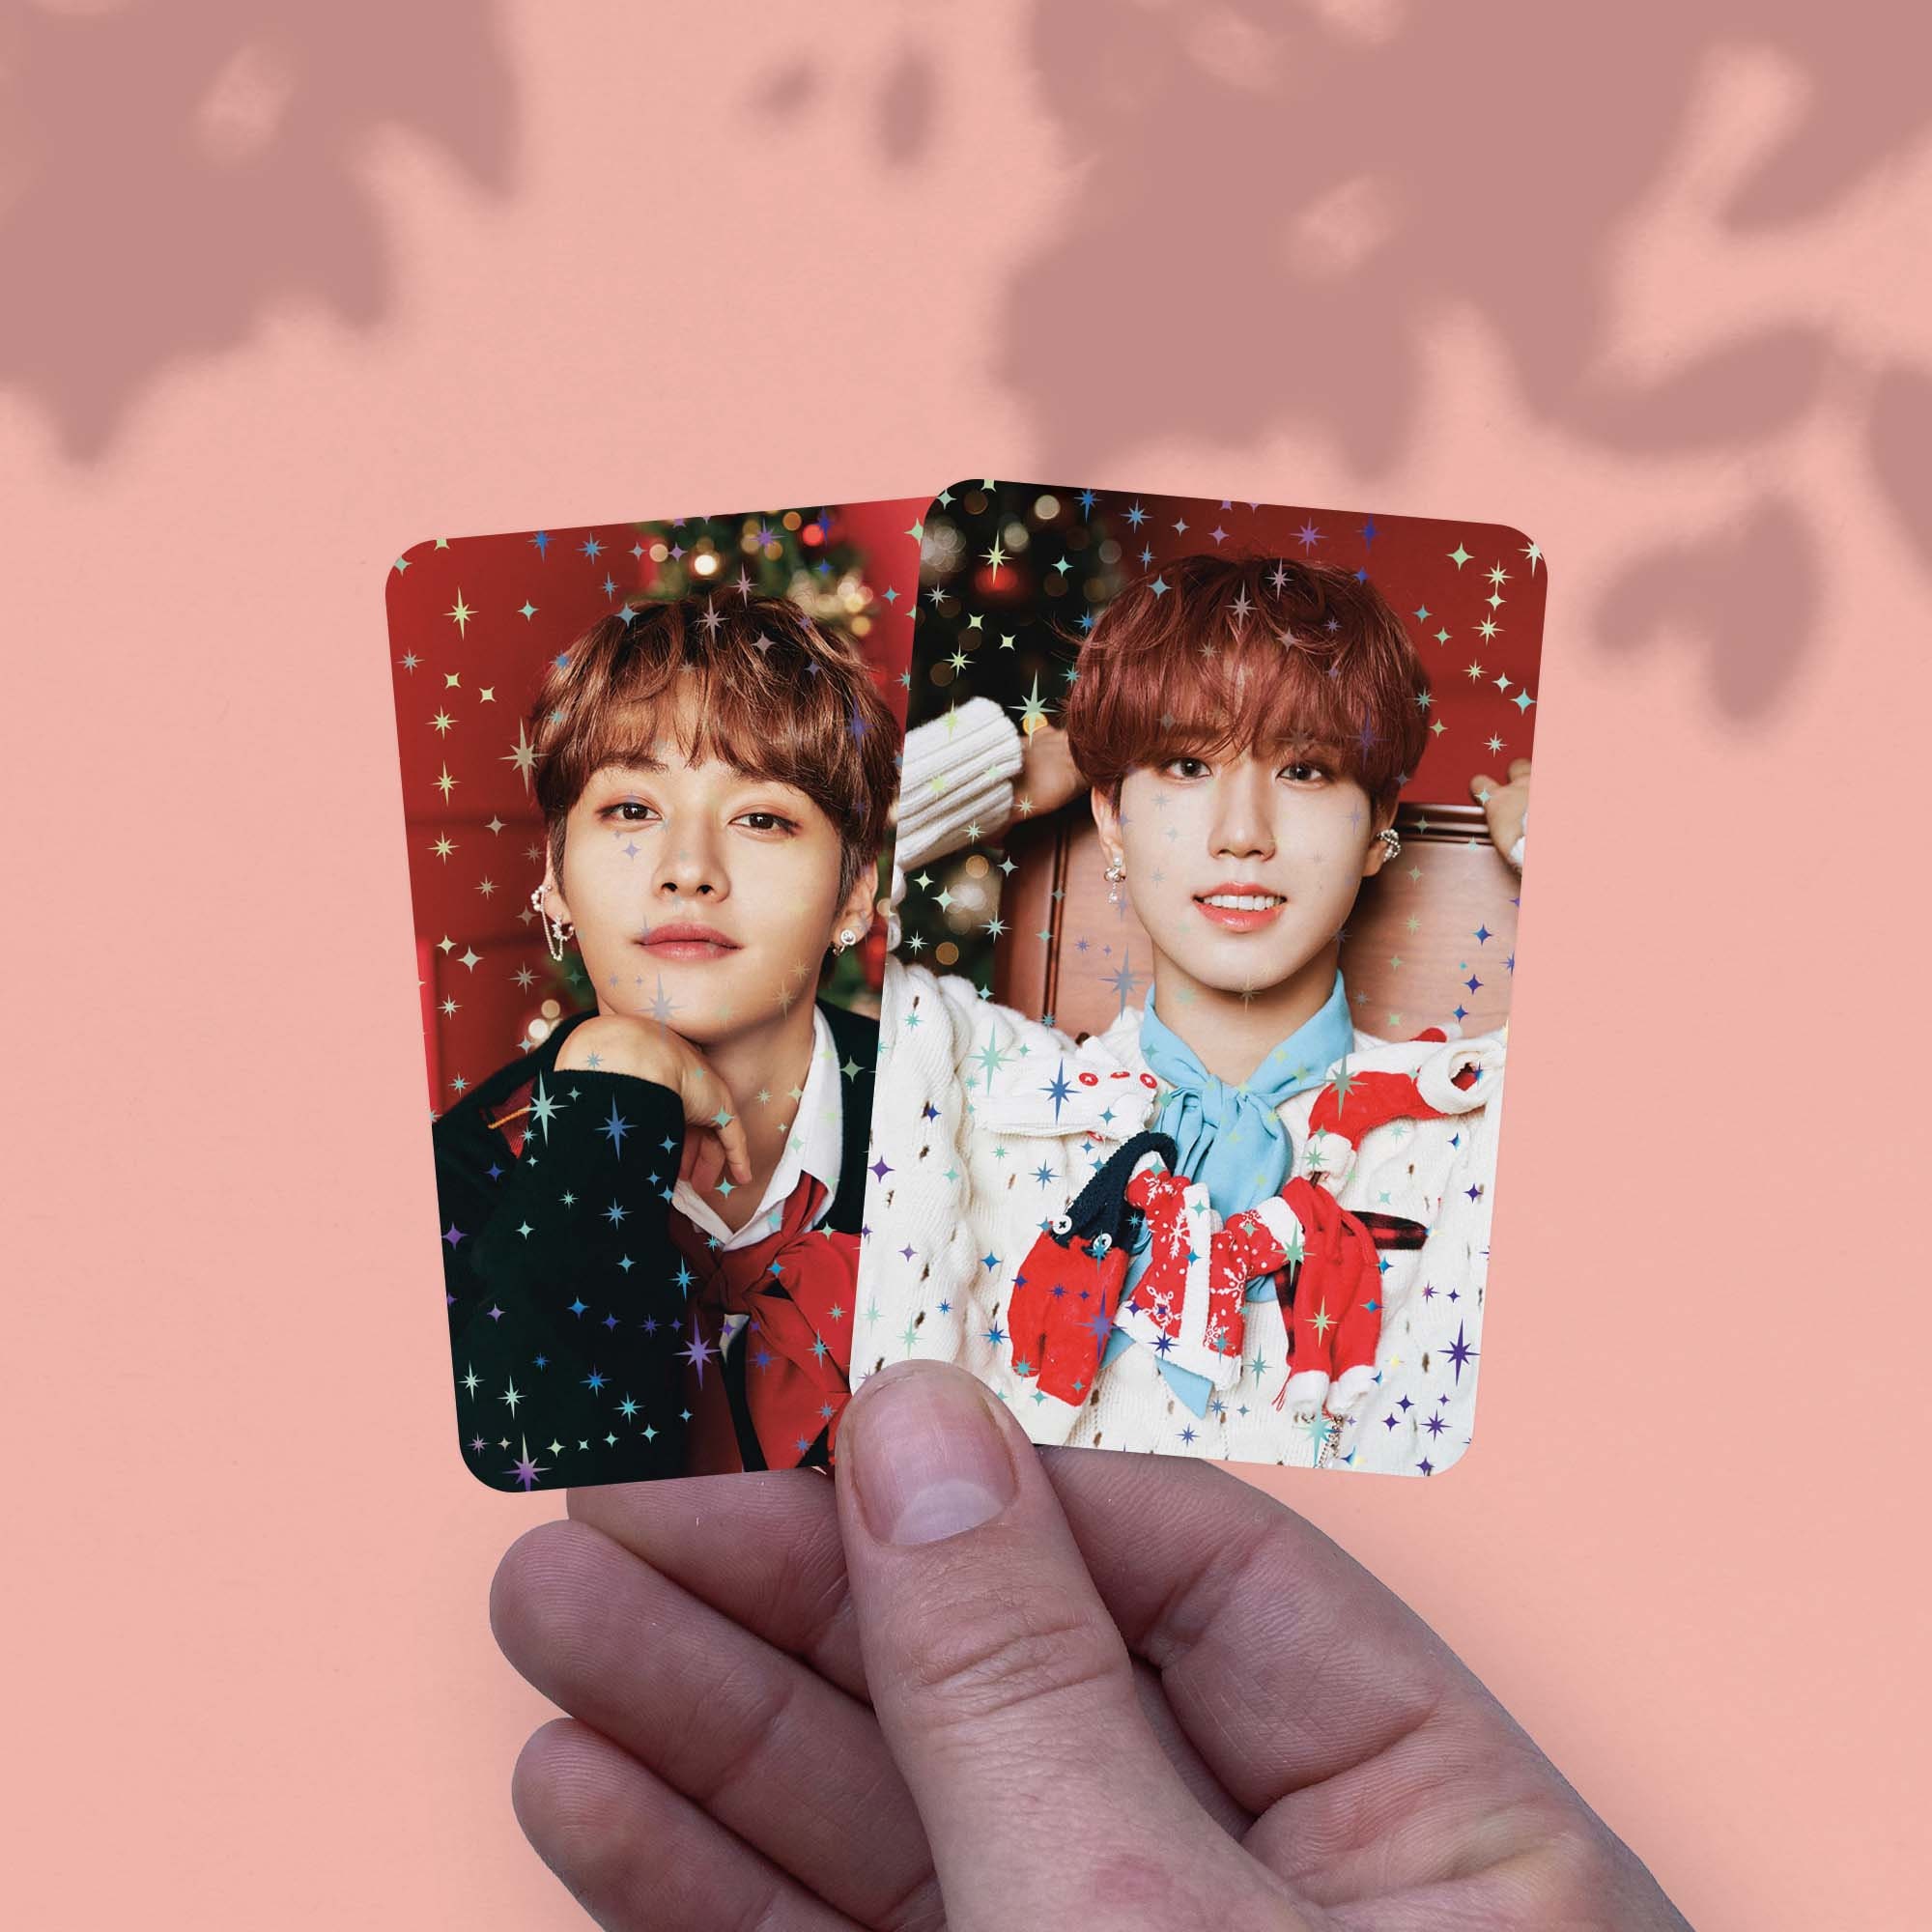 Stray Kids Photocard Set Finding SKZ 3 Episode 1 Fanmade Lomo OT8 Perfect  Gift for STAY Friends, Daughter Matte 